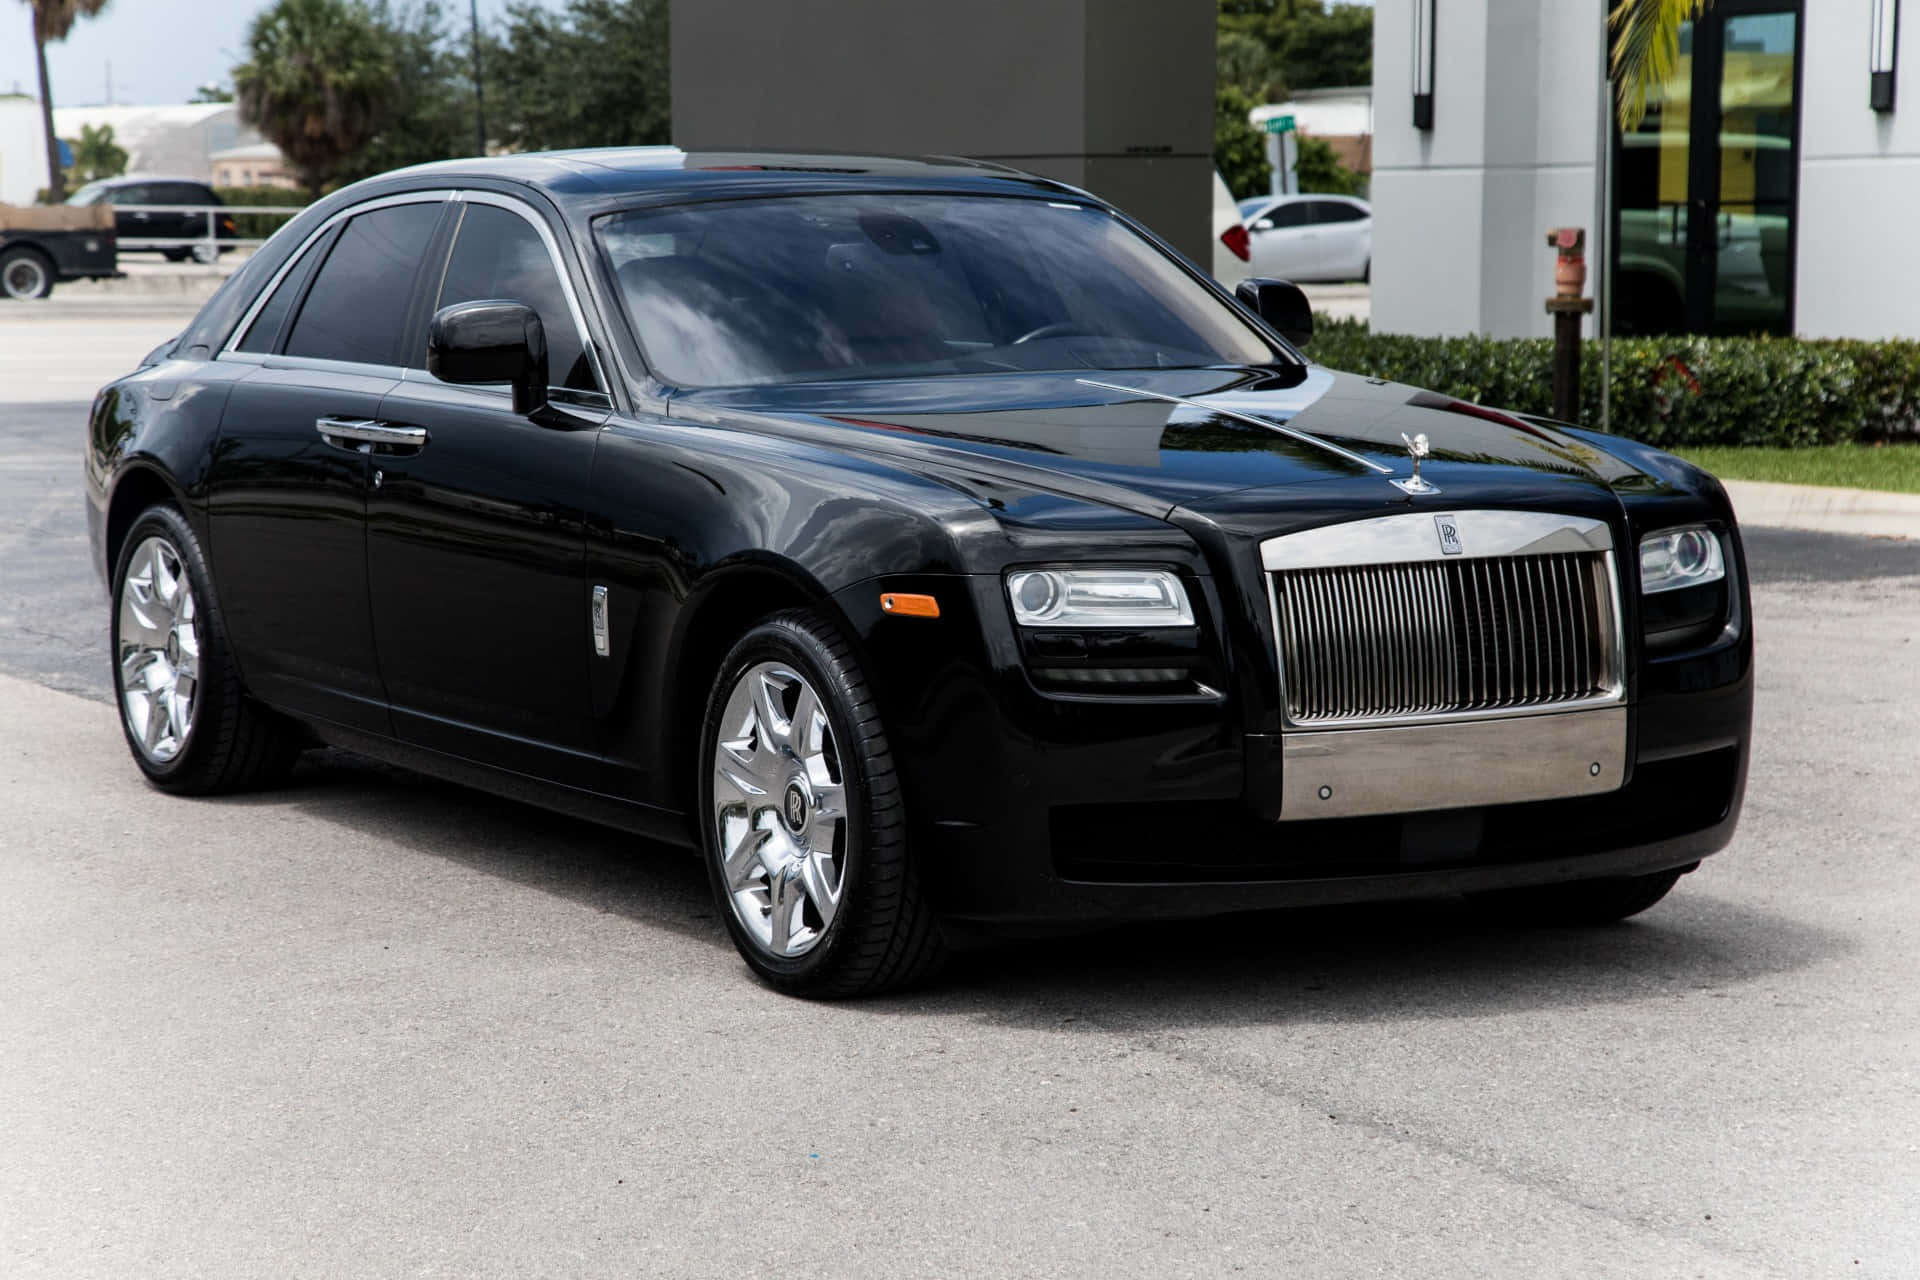 Luxury Personified - The Impeccable Rolls Royce Ghost. Wallpaper